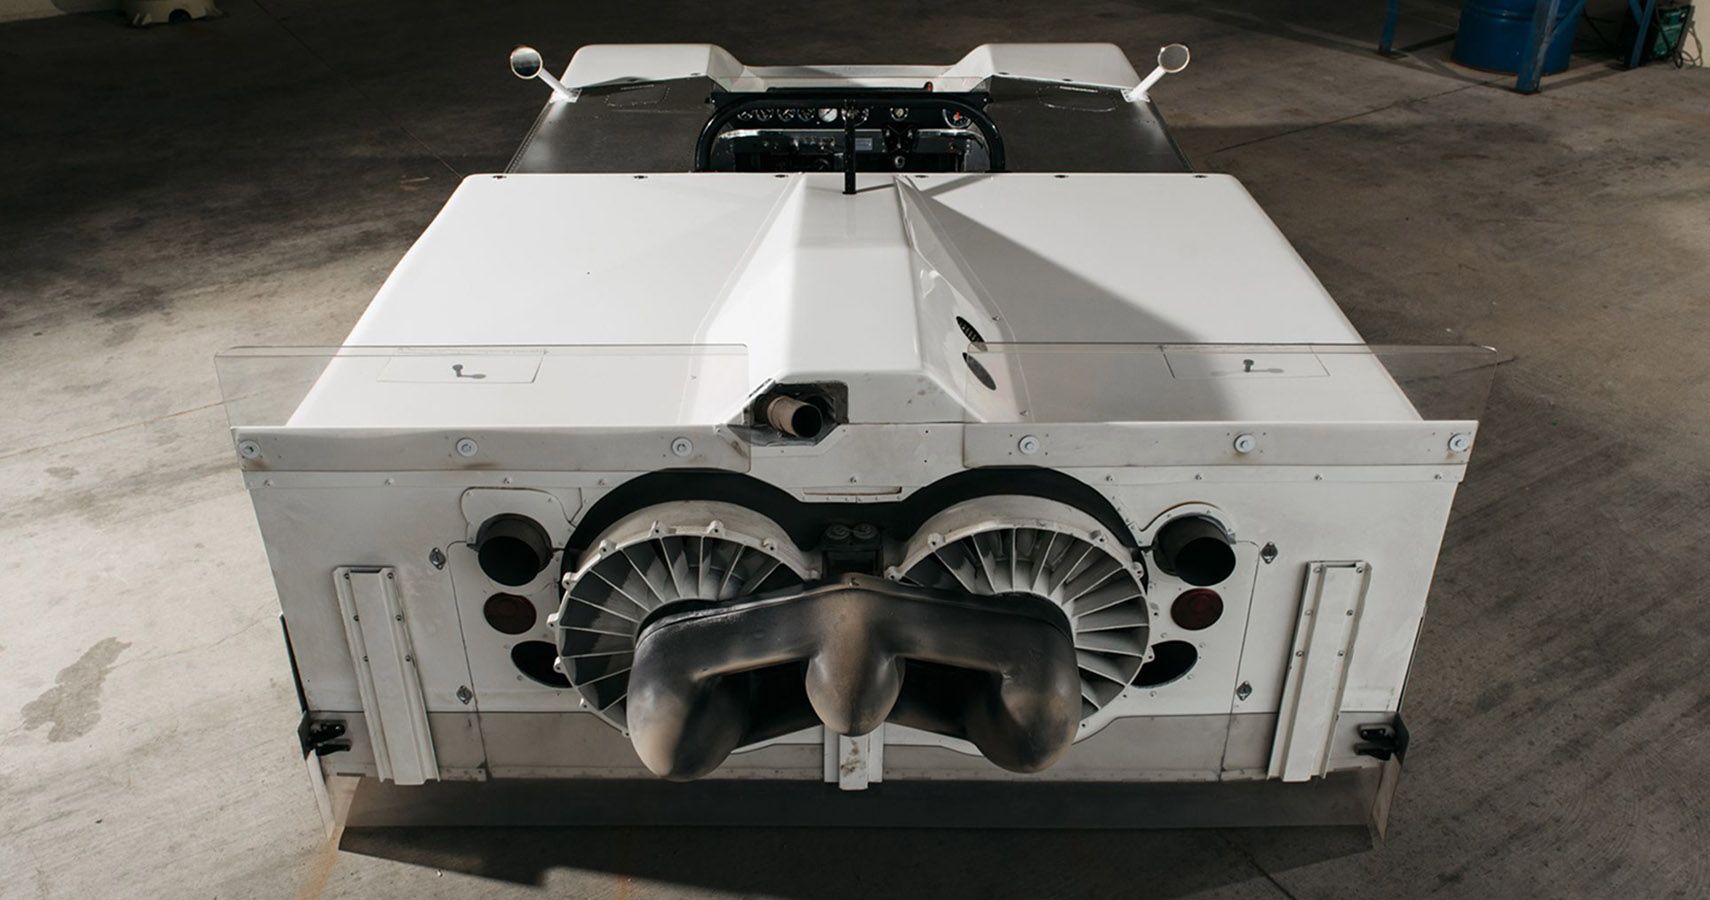 The Chaparral 2J Was Armed With Two Rear Fans, From The M-109 Howitzer, A Military Weapon Categorized As Batteries